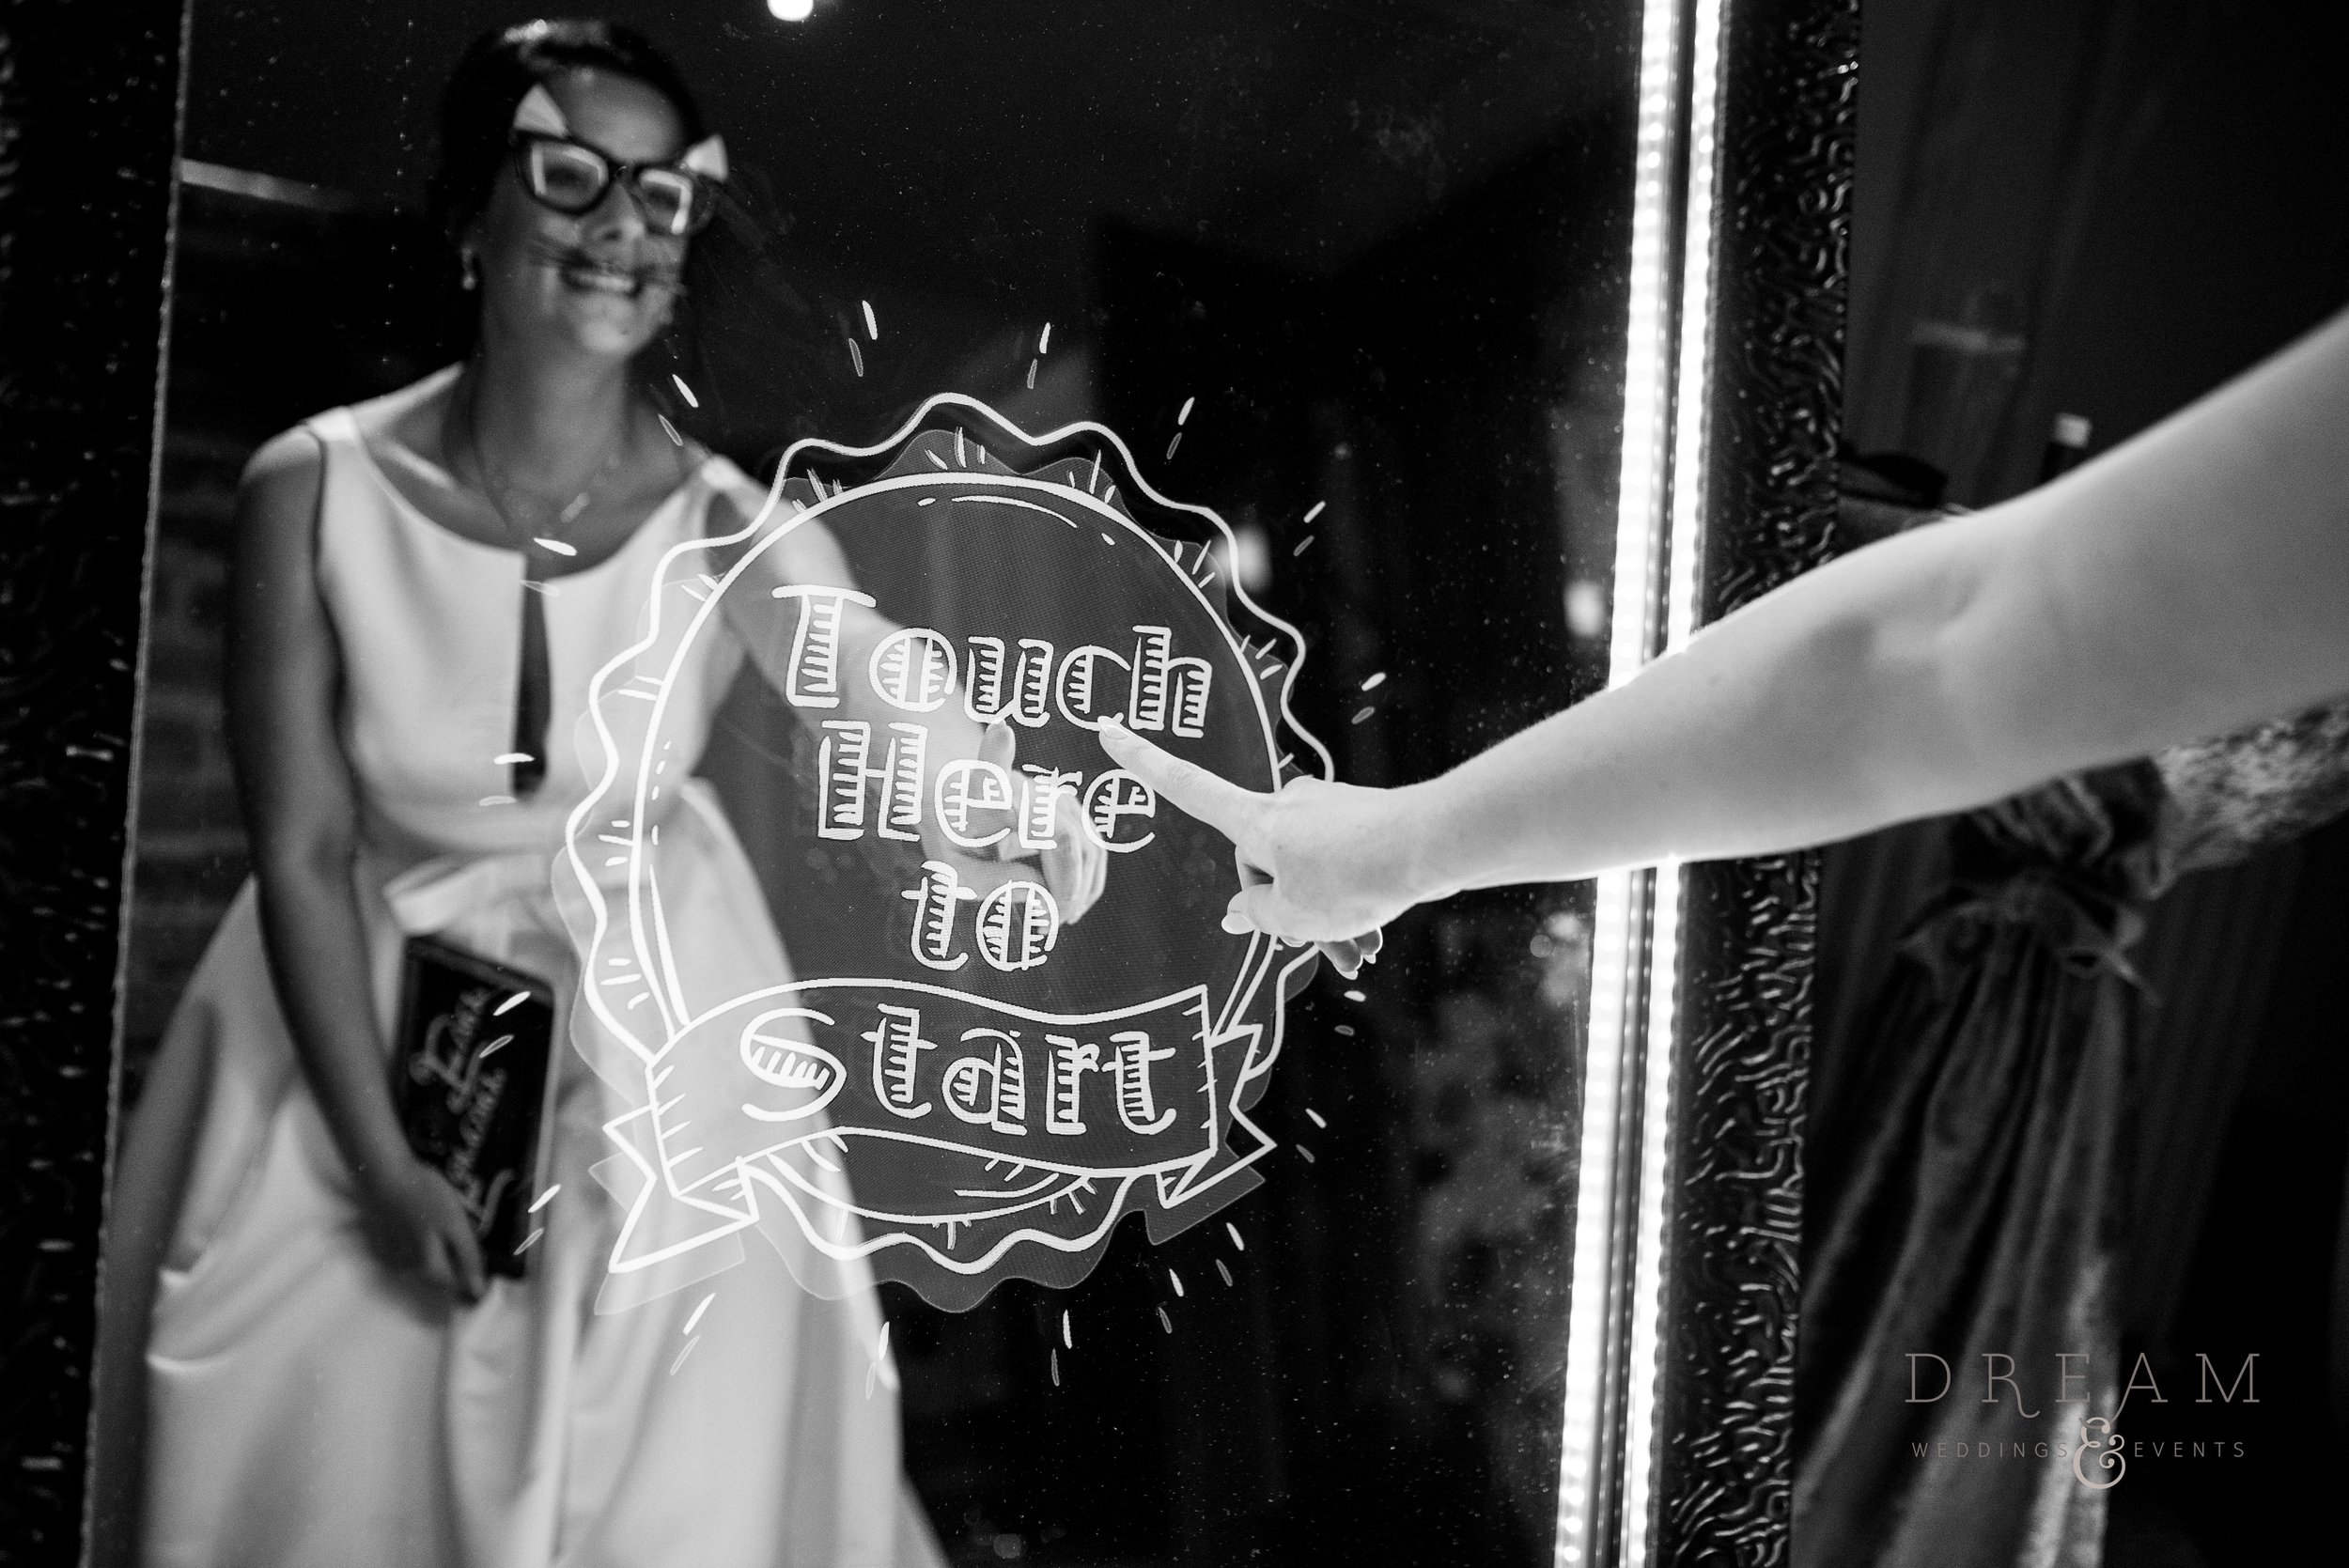 Magic Mirror Photo Booth Hire Nottingham, Derby, Leicester, East Midlands.